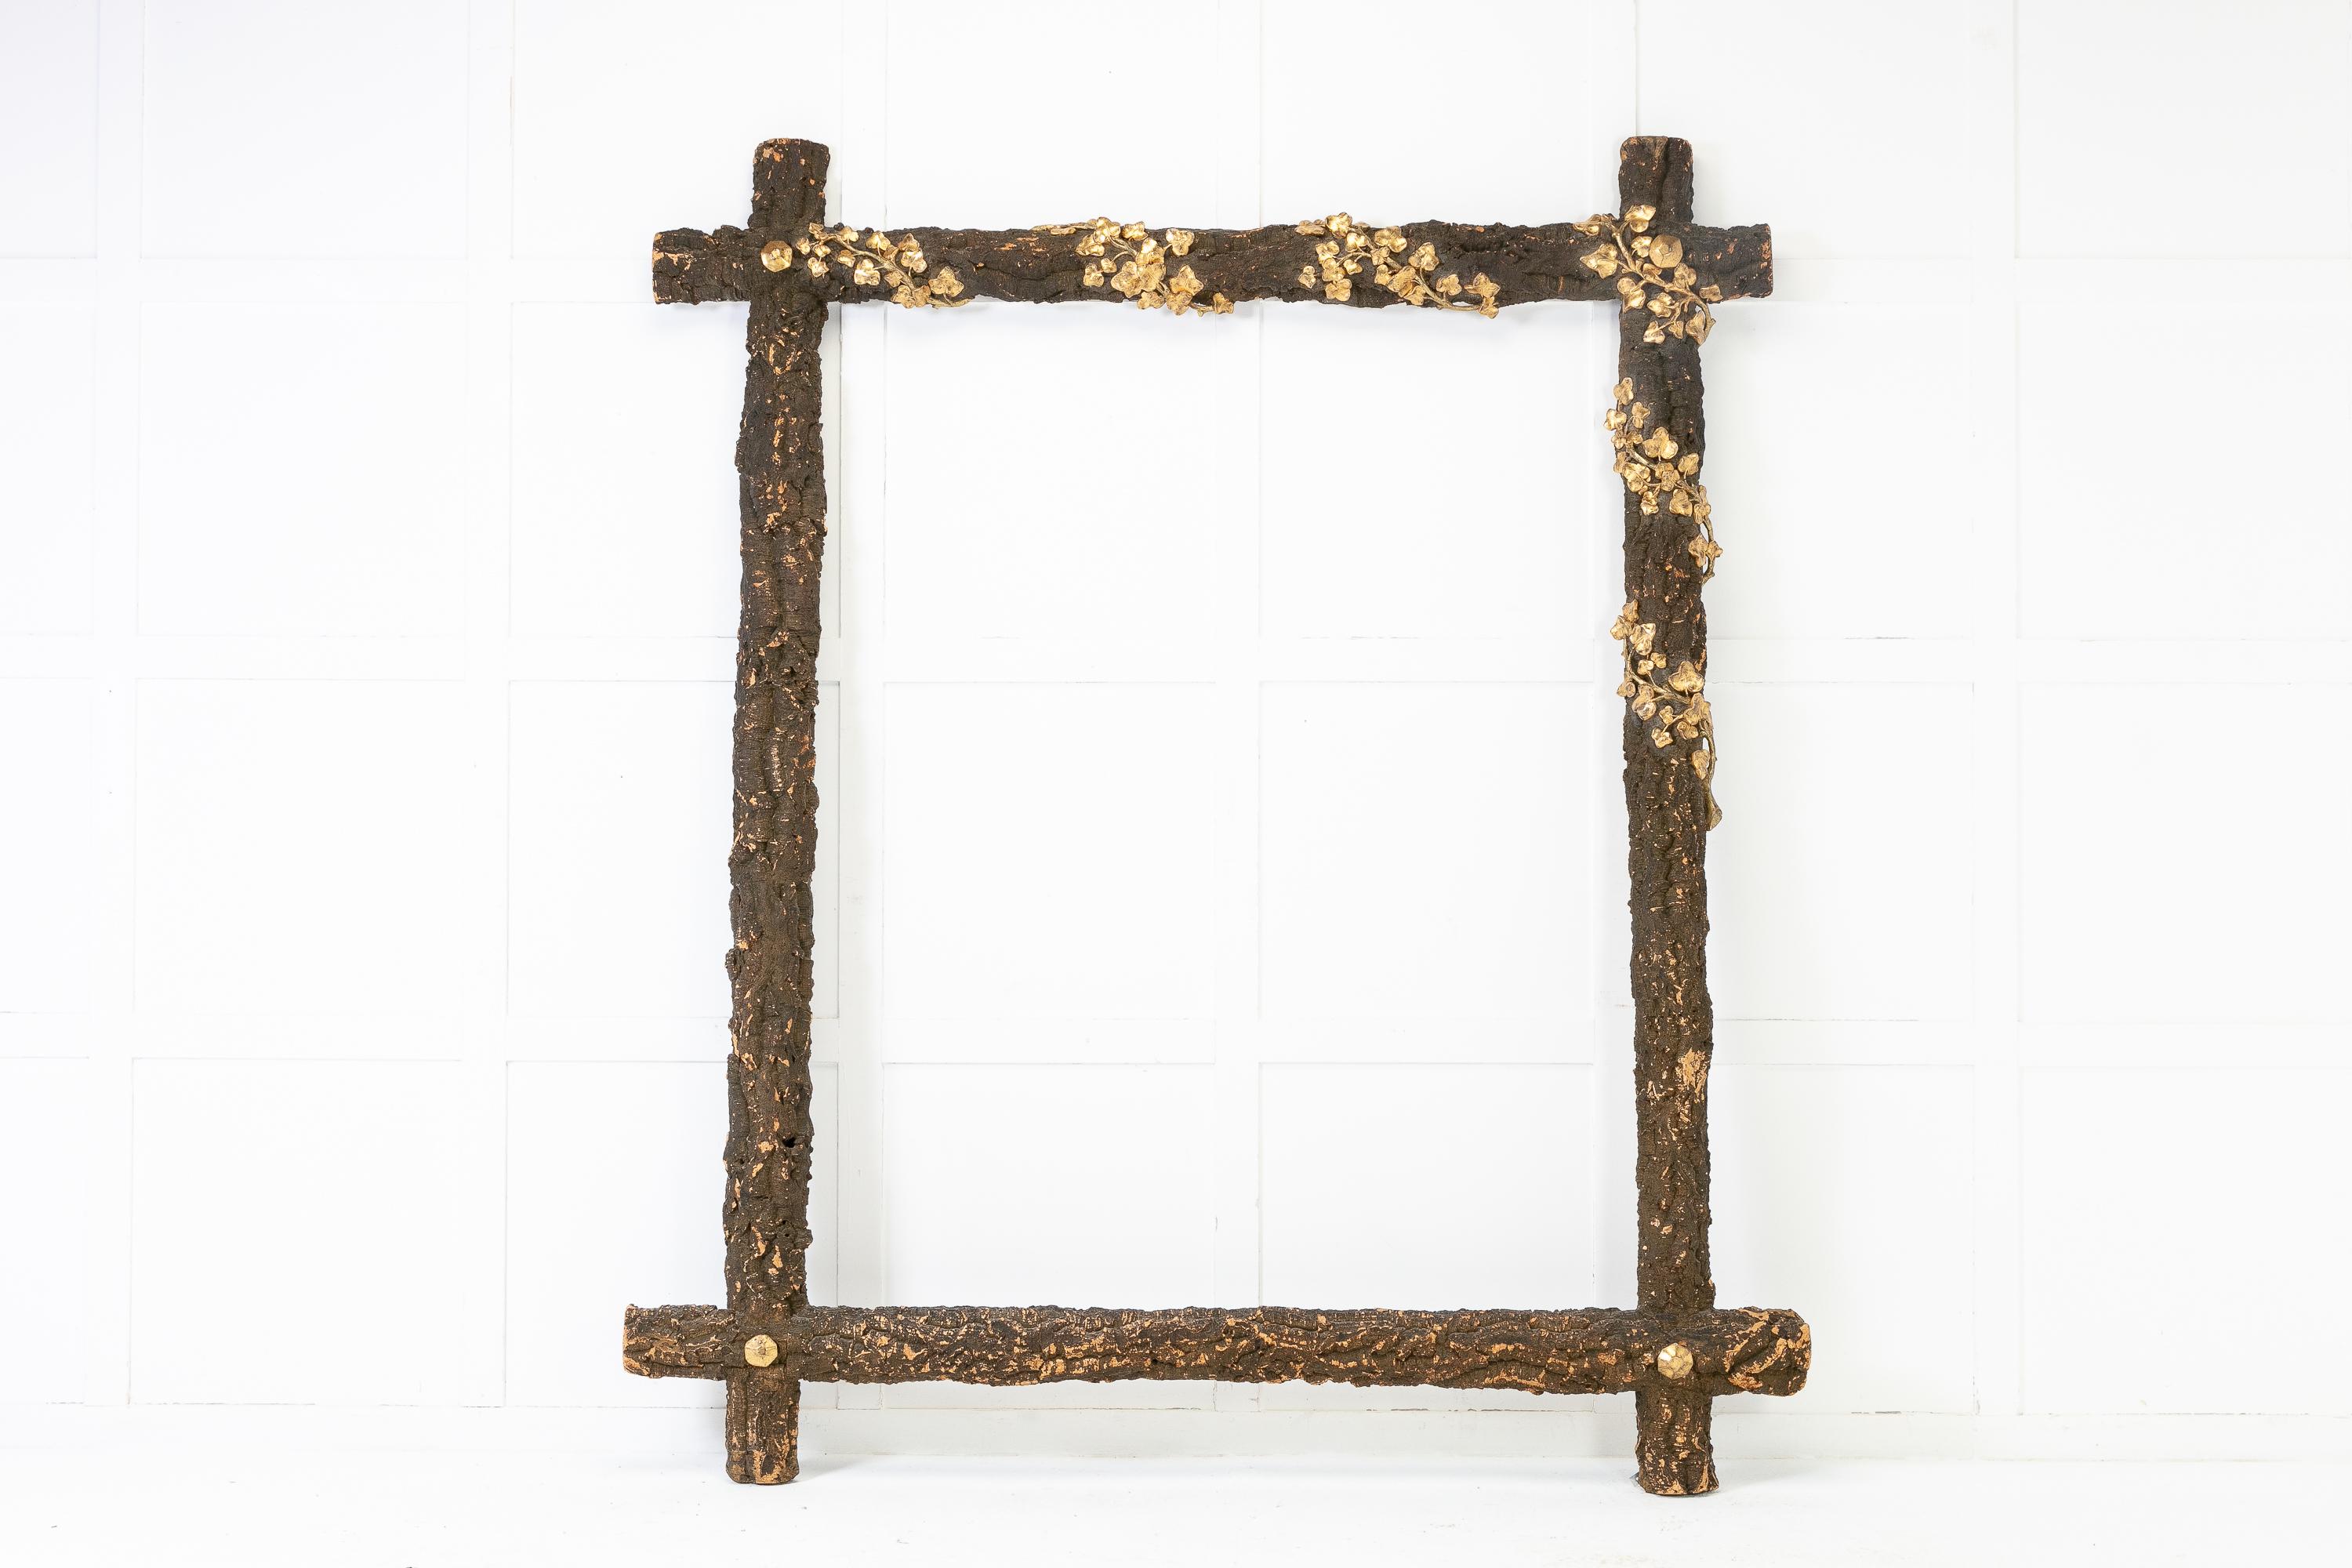 An enormous, French 19th Century mirror frame made from the cork tree. Having gilded, decorative vine leaves trailing though it.
 